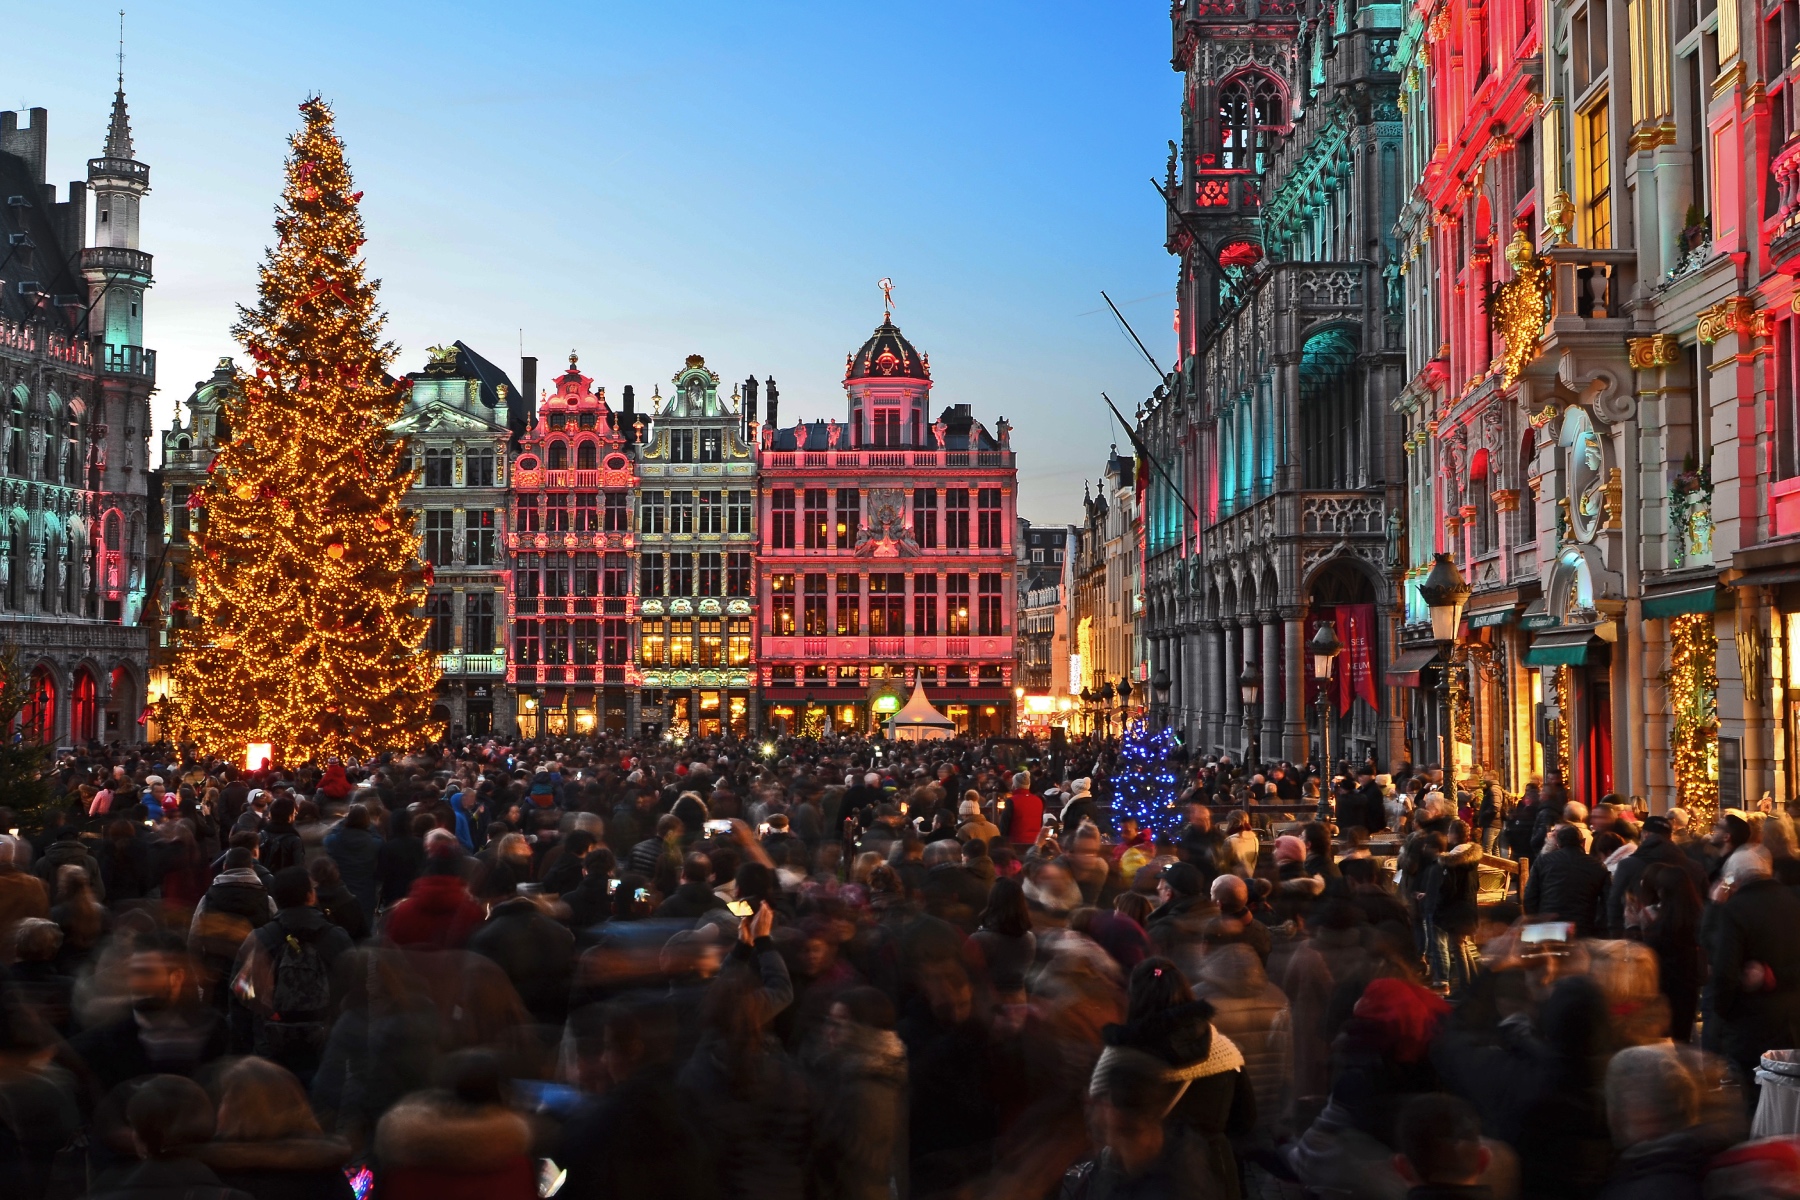 Christmas celebrated outdoors with crowds of people in Grand Palace, Brussels. The buildings in the square are illuminated with colourful lights